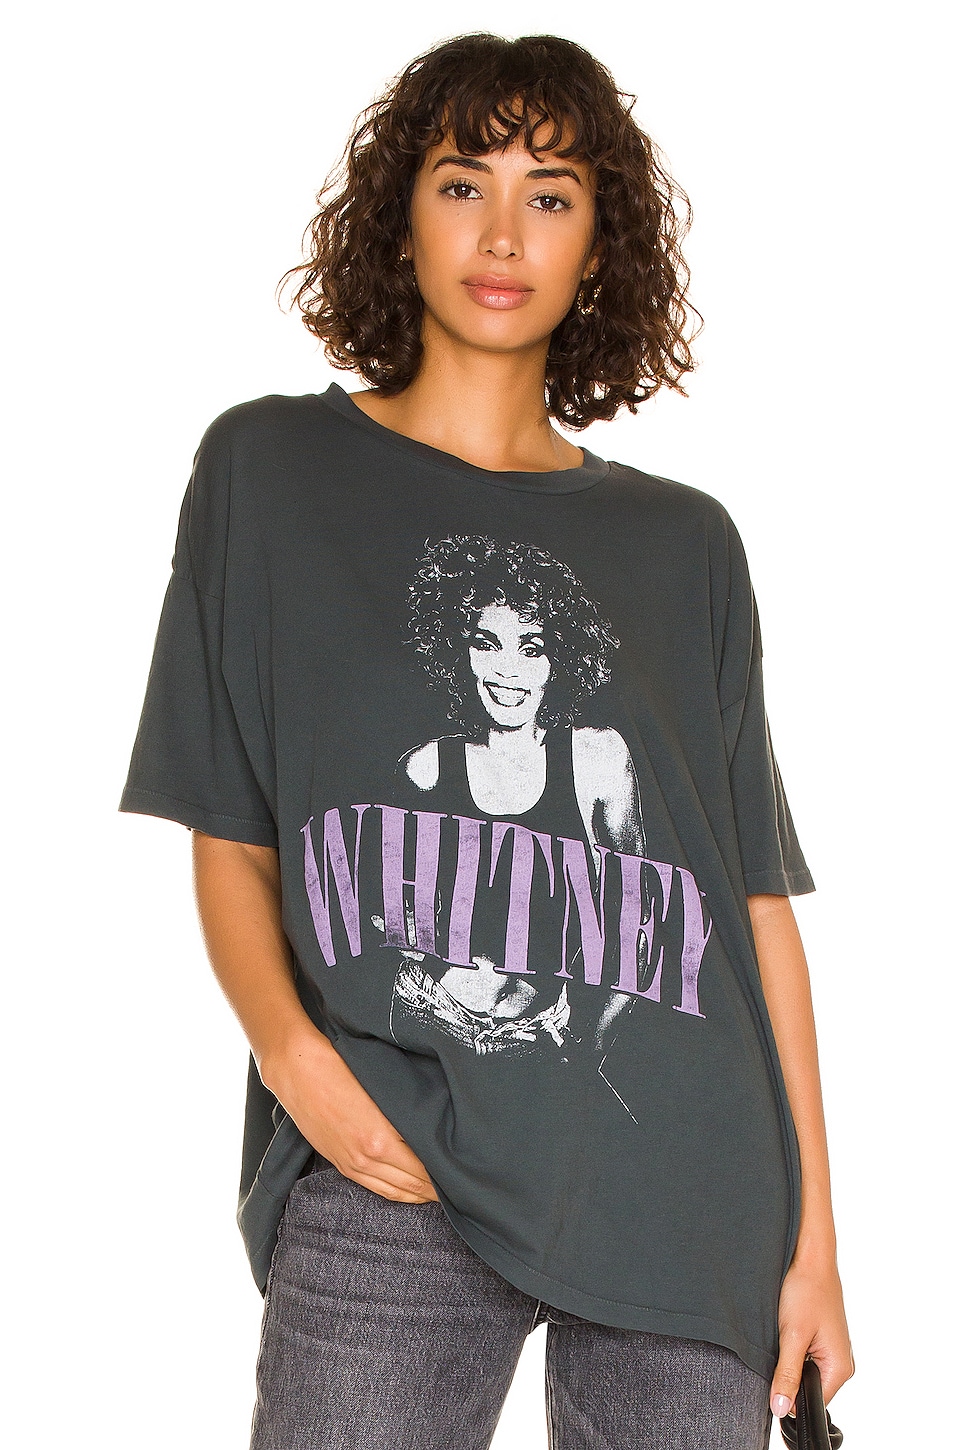 DAYDREAMER Whitney Houston For The Love Of You Merch Tee in Vintage ...